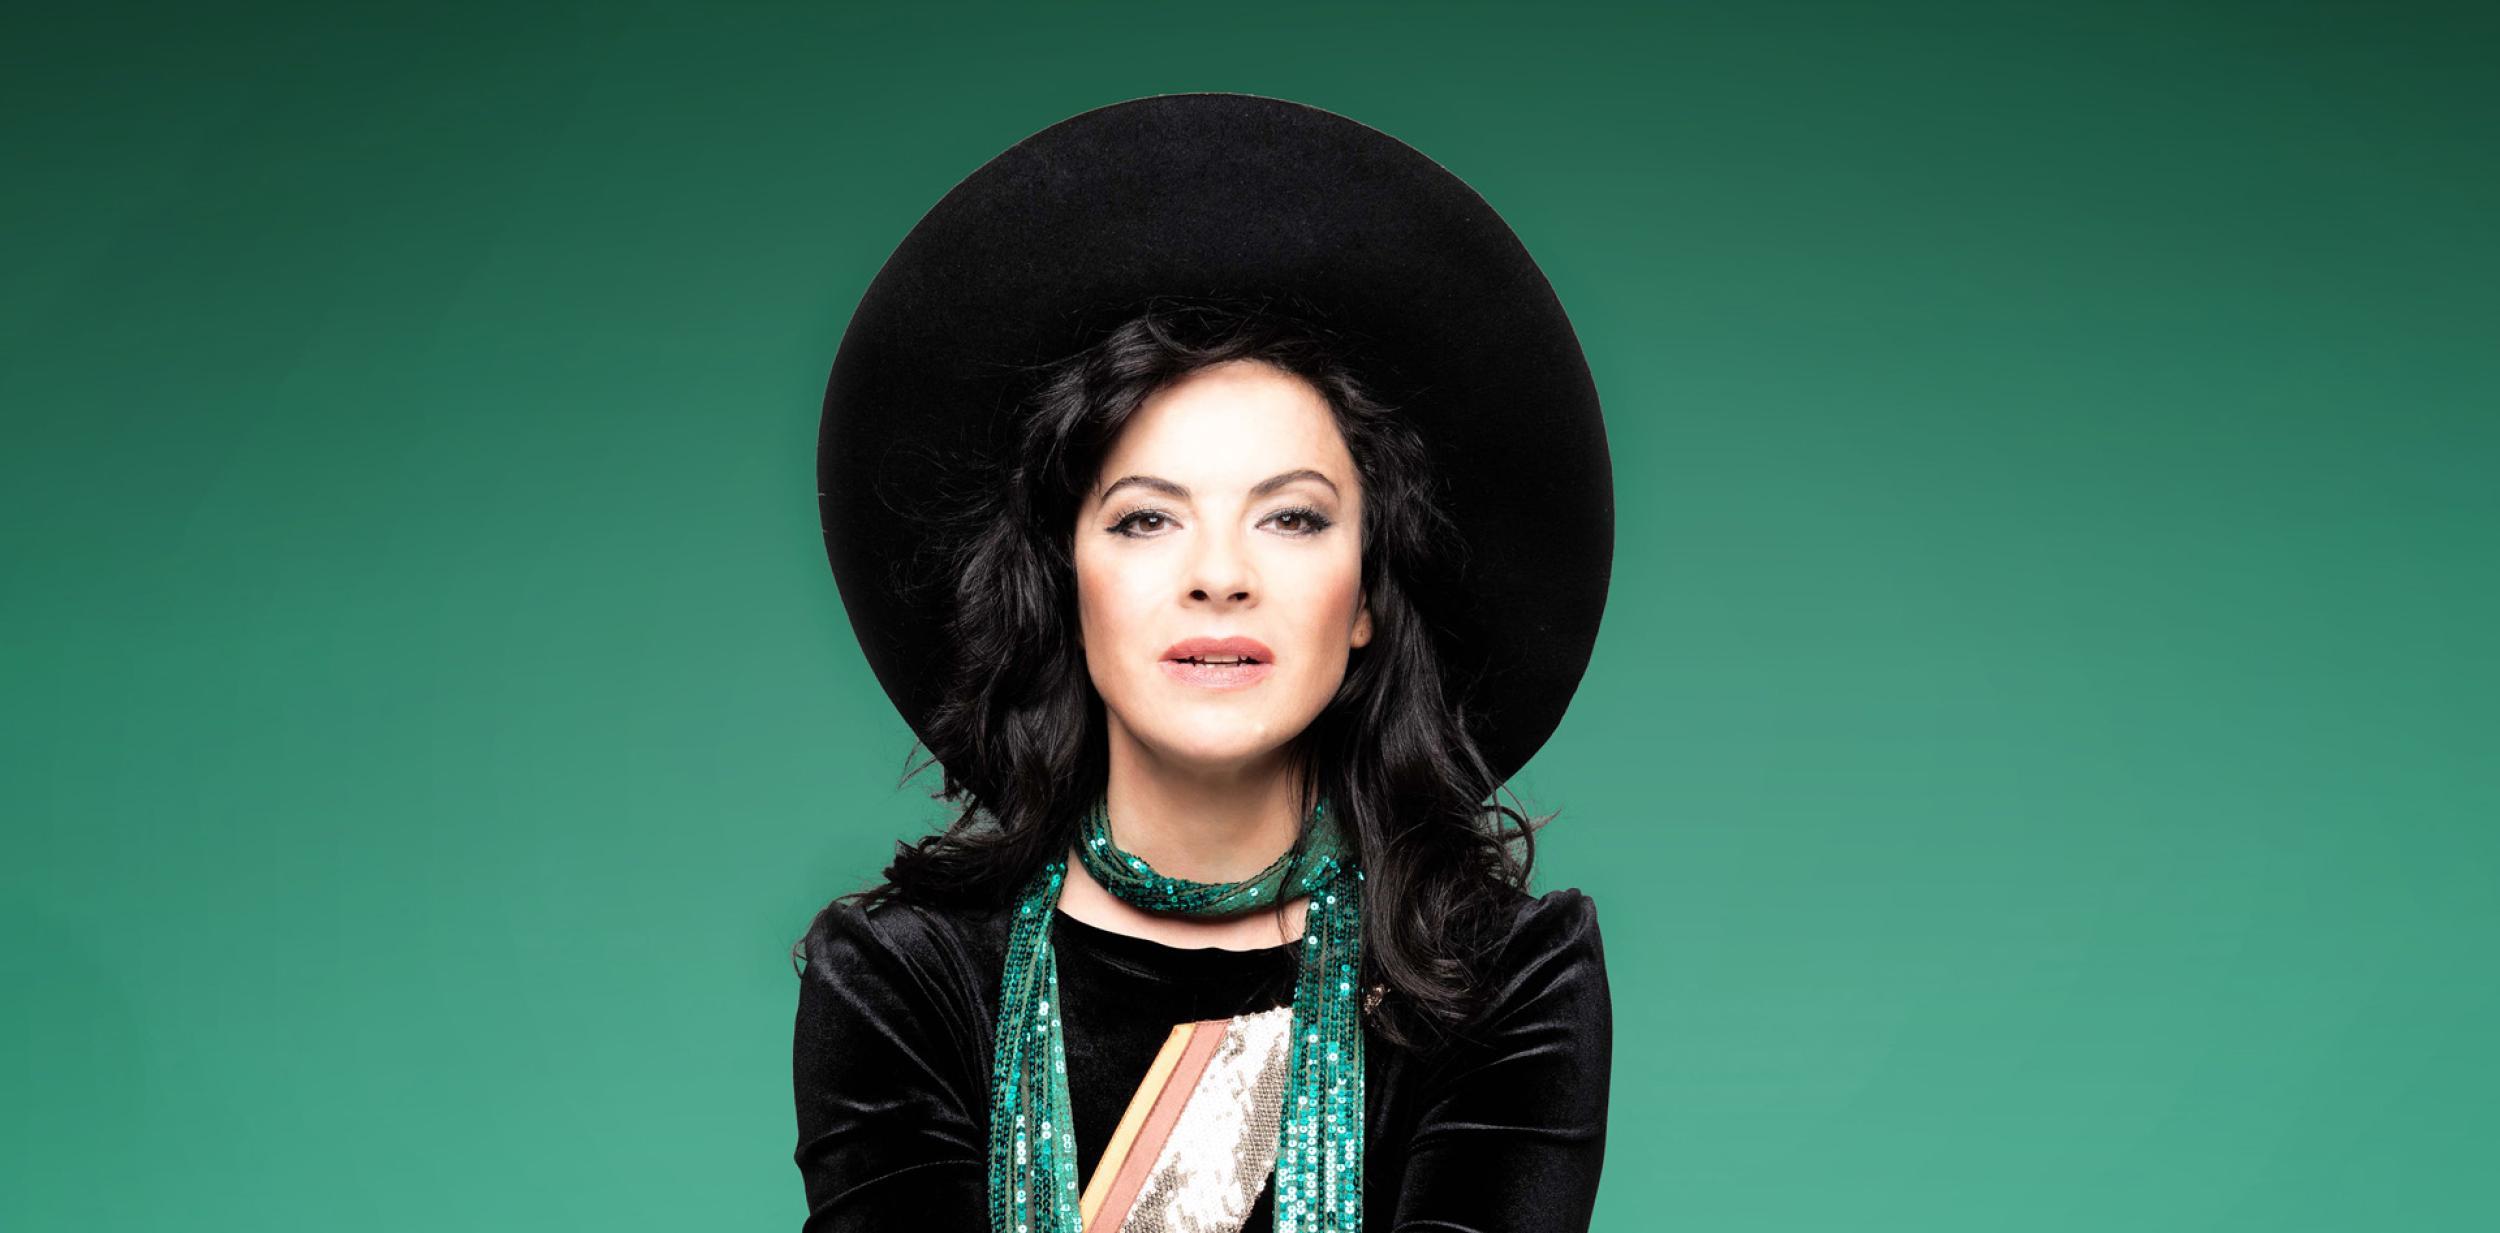 female in black hat jacket with green scarf against a green background